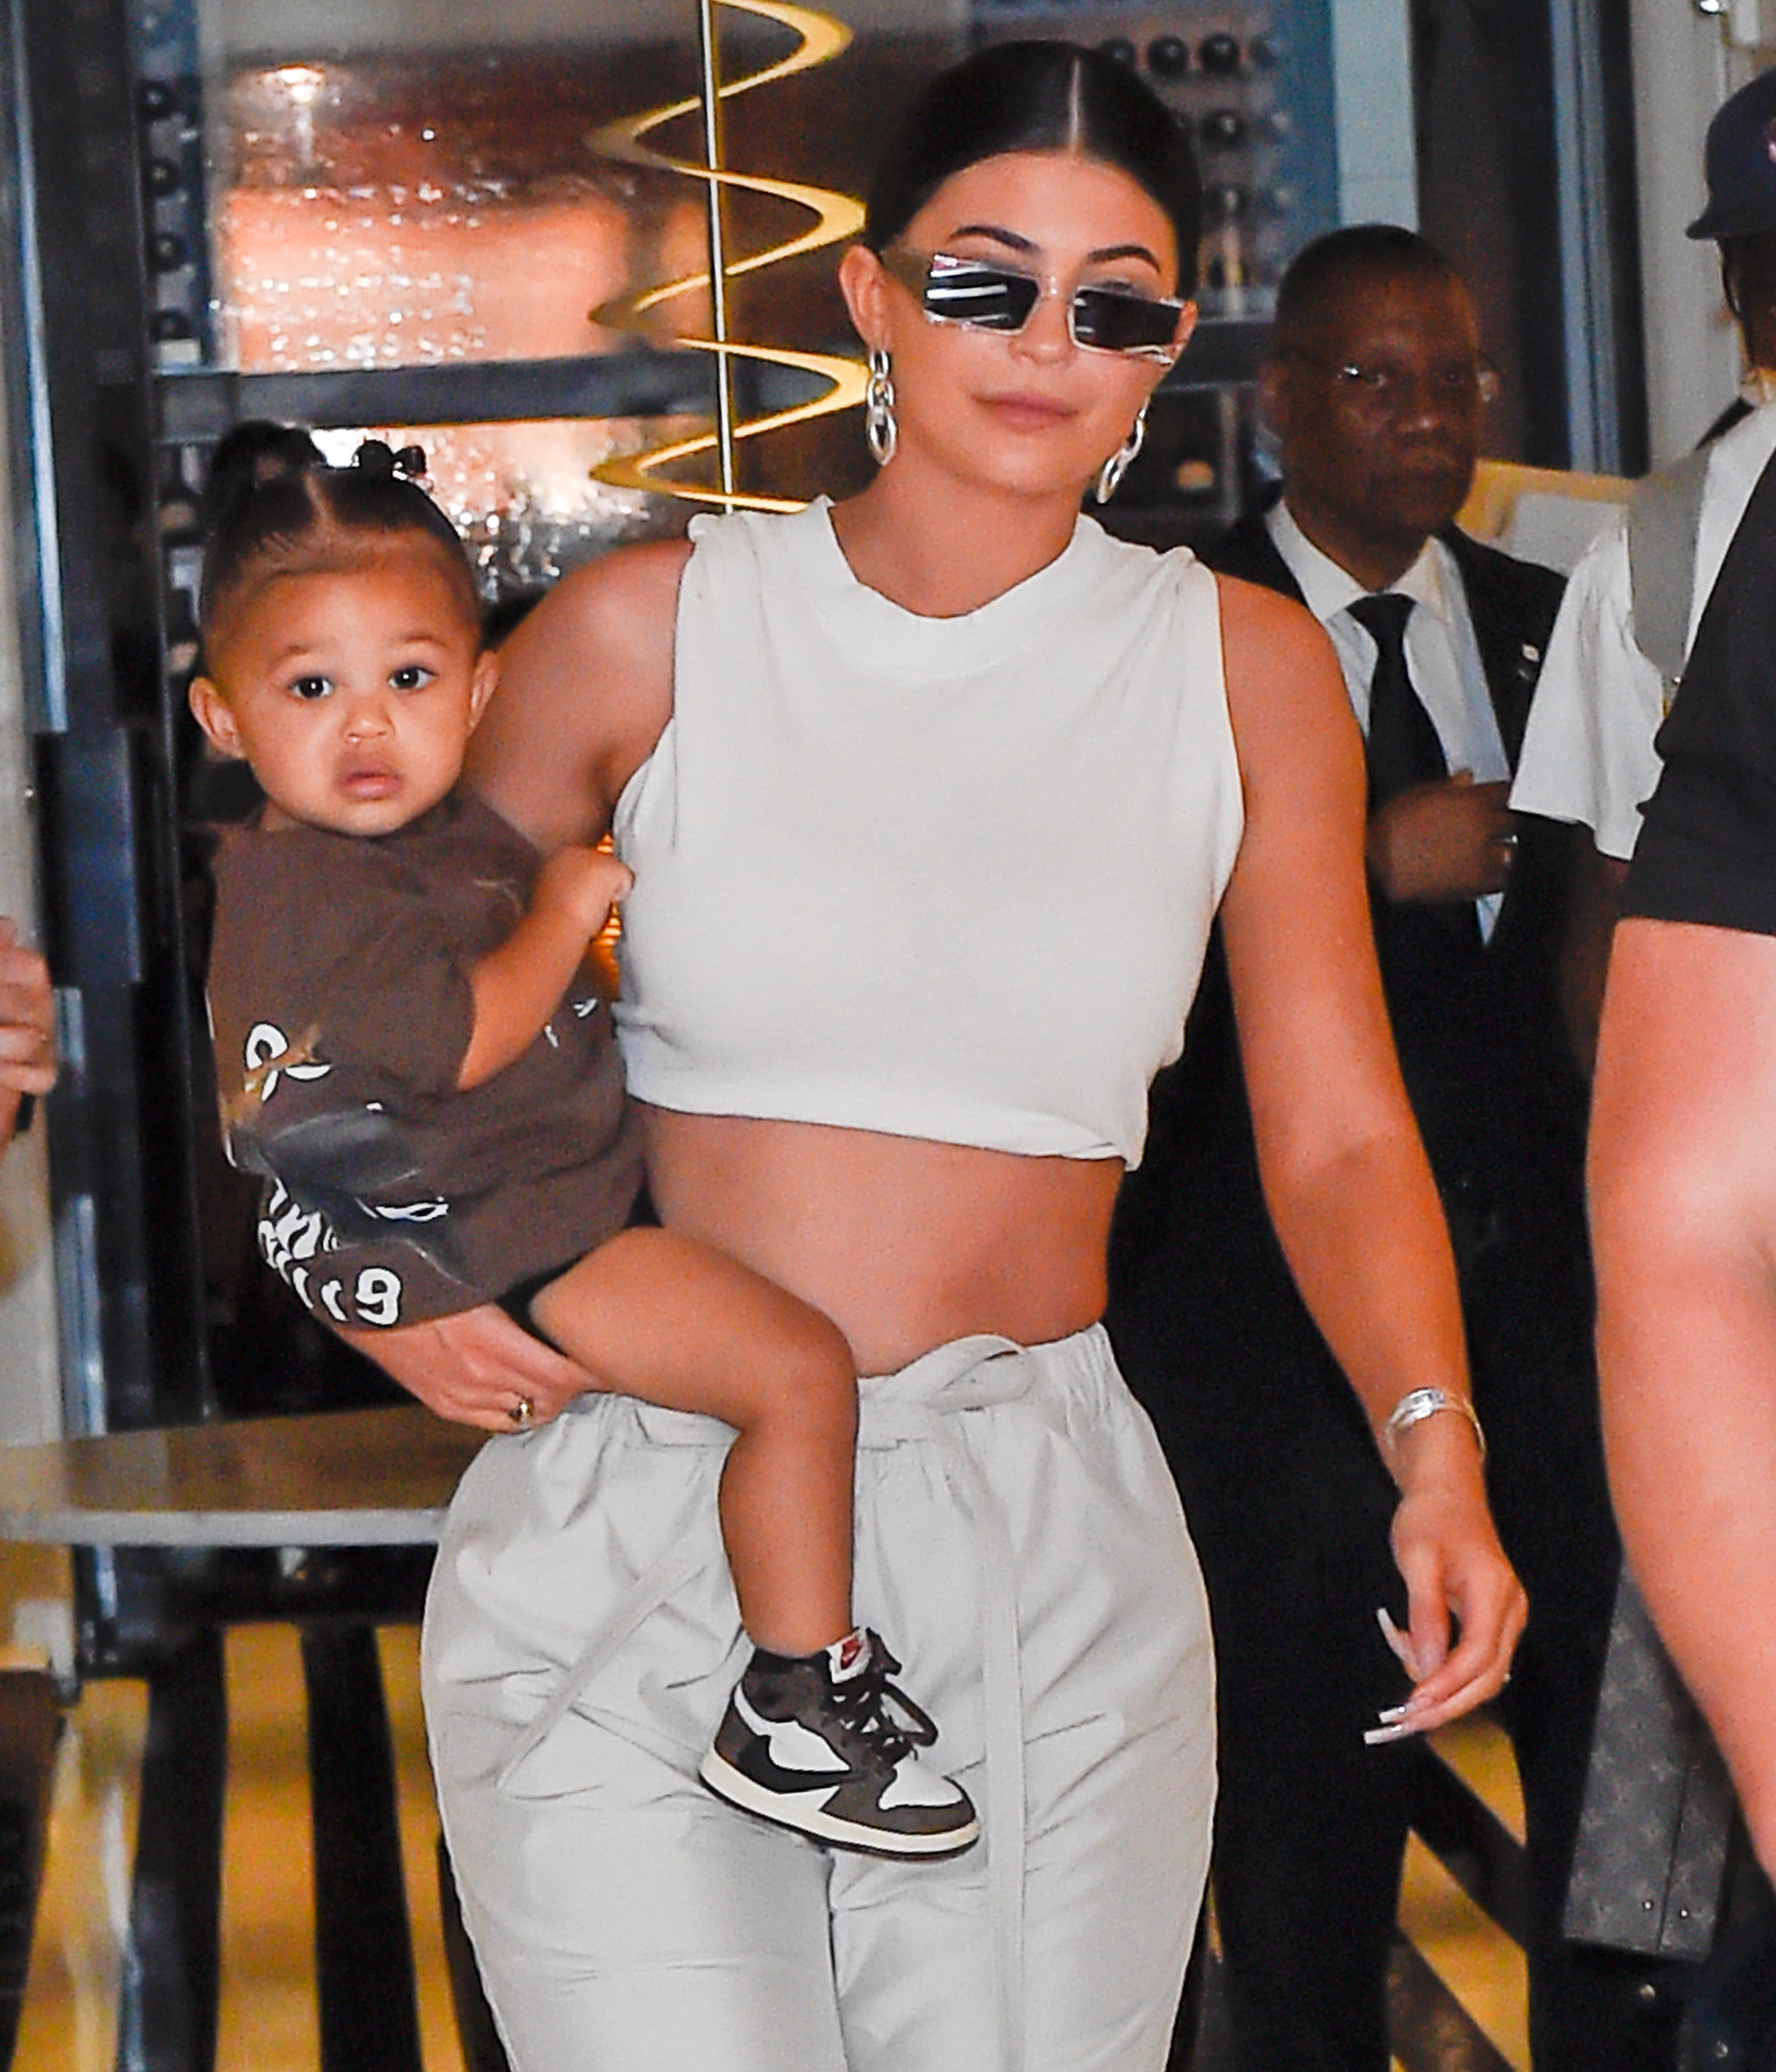 Kylie Jenner is carrying her child by her side while walking